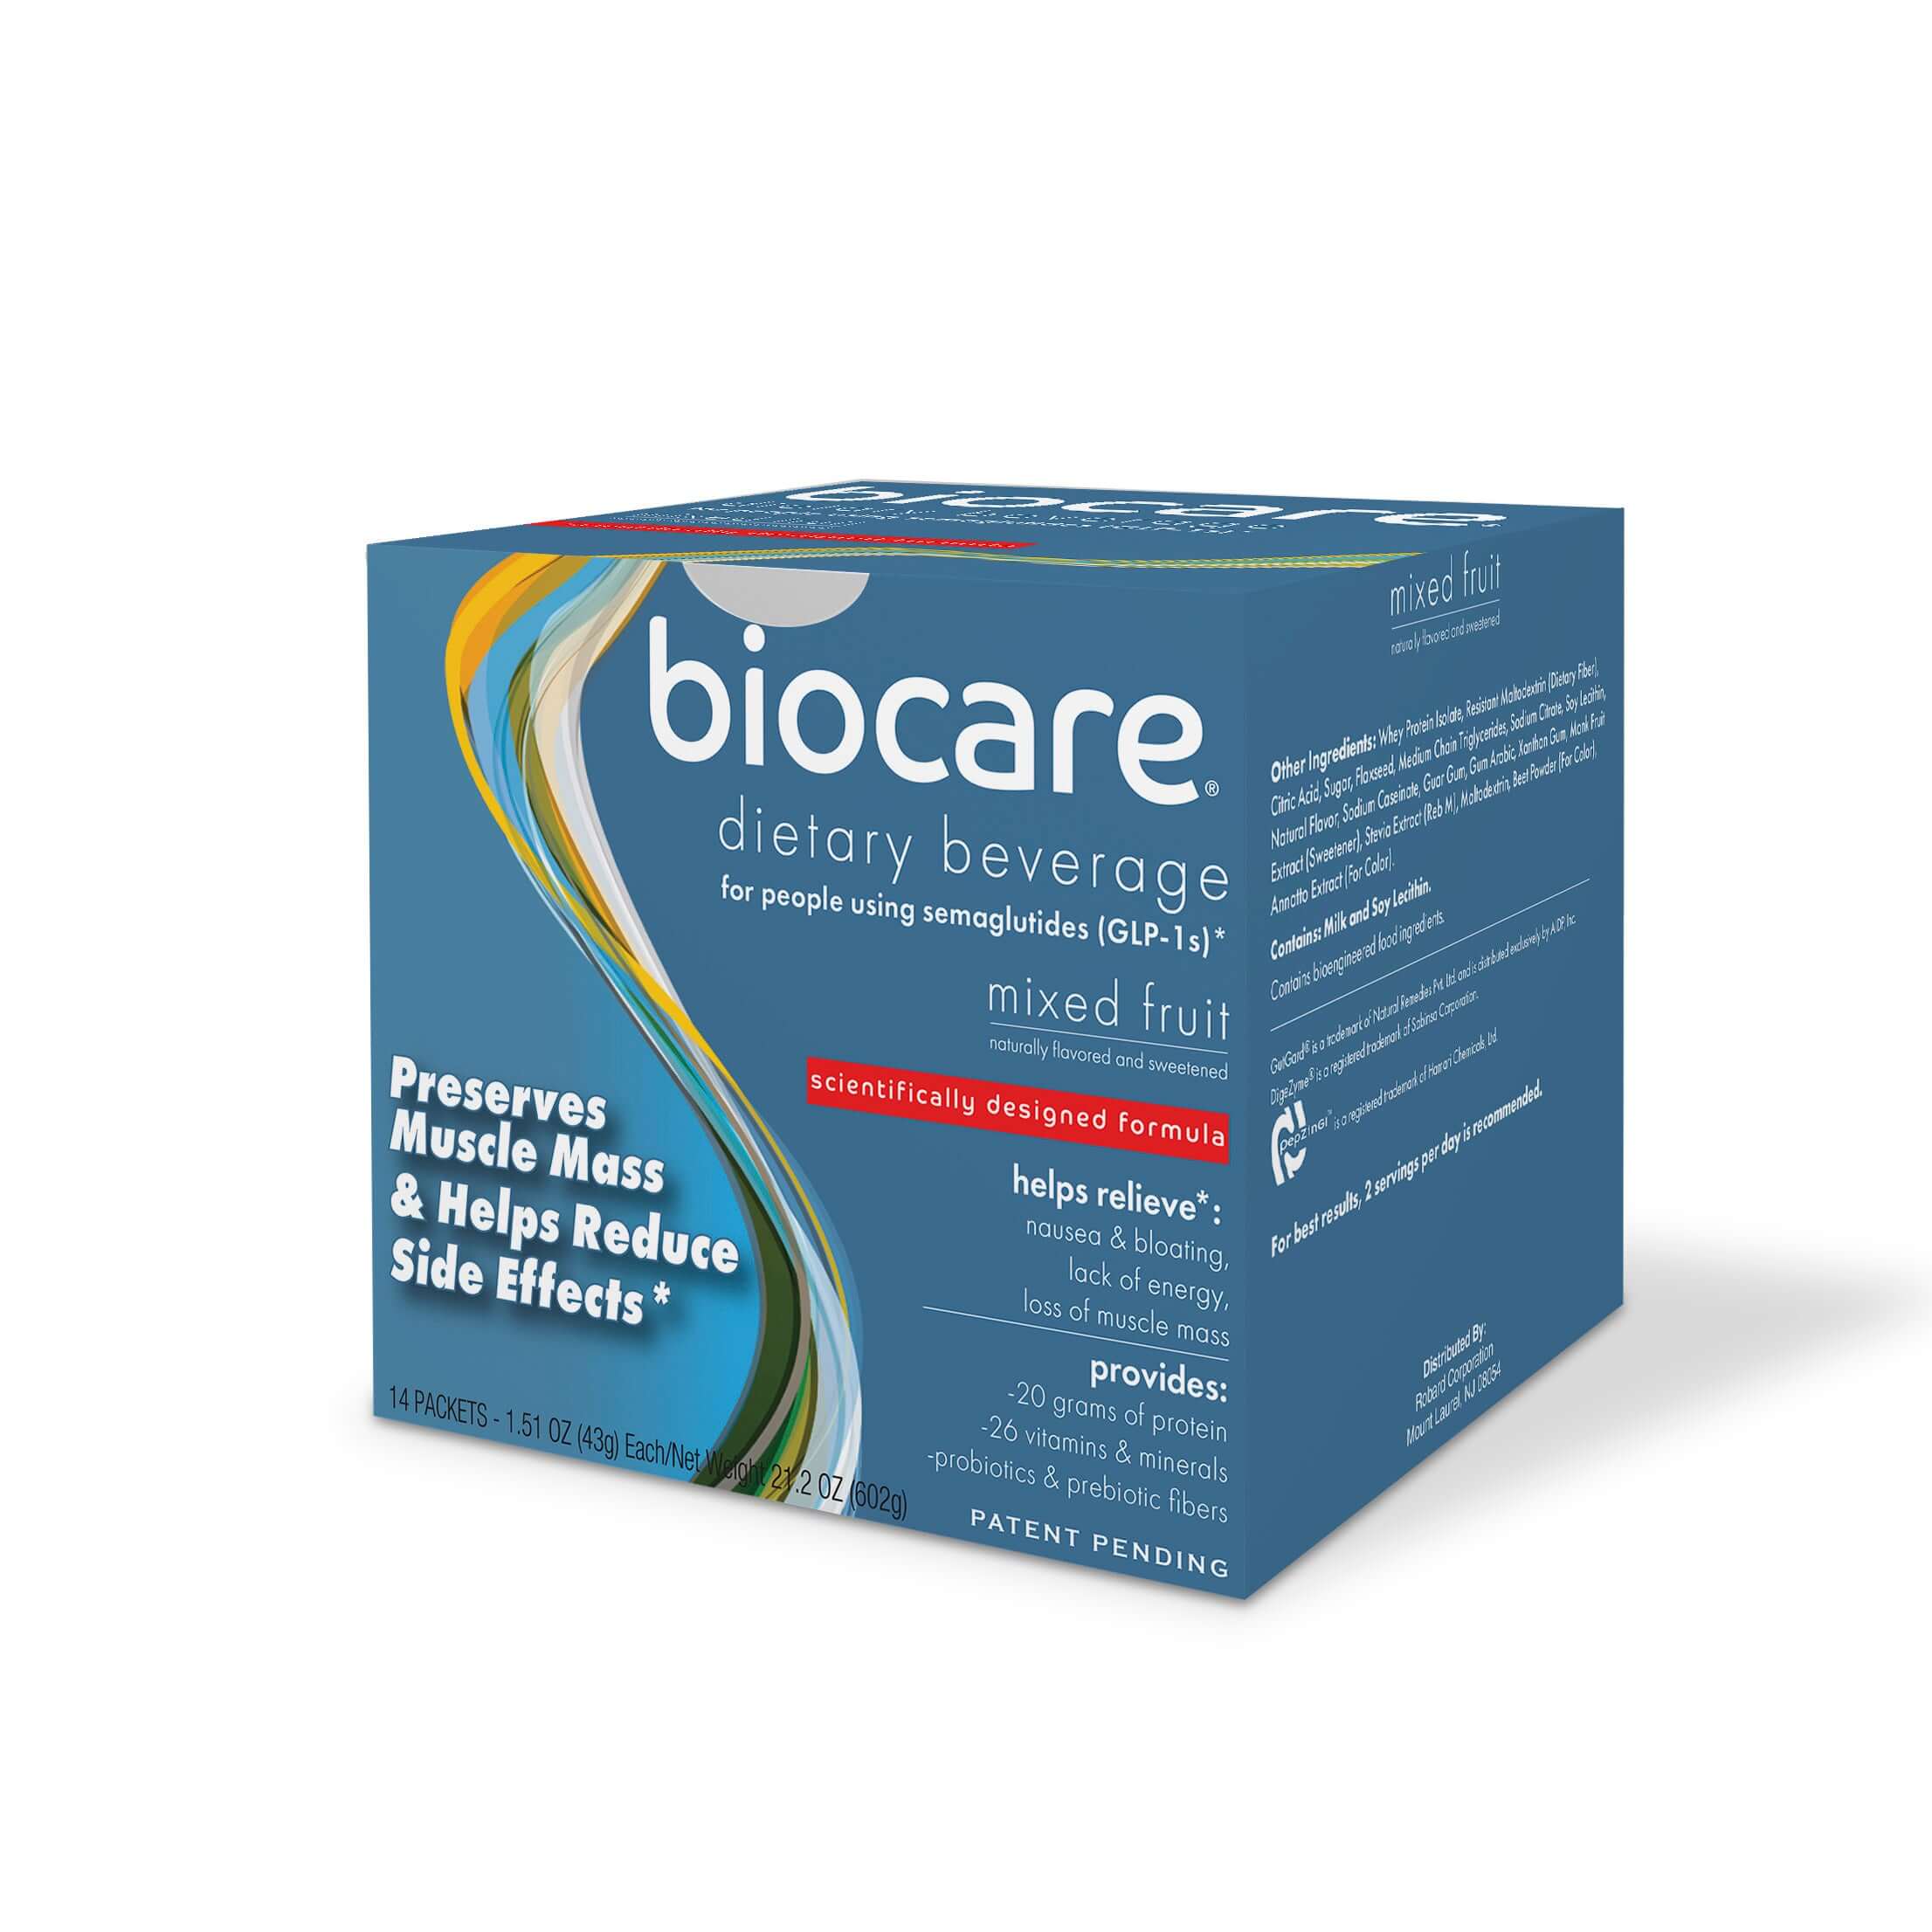 Image of Biocare semaglutide constipation relief box for ozempic side effects